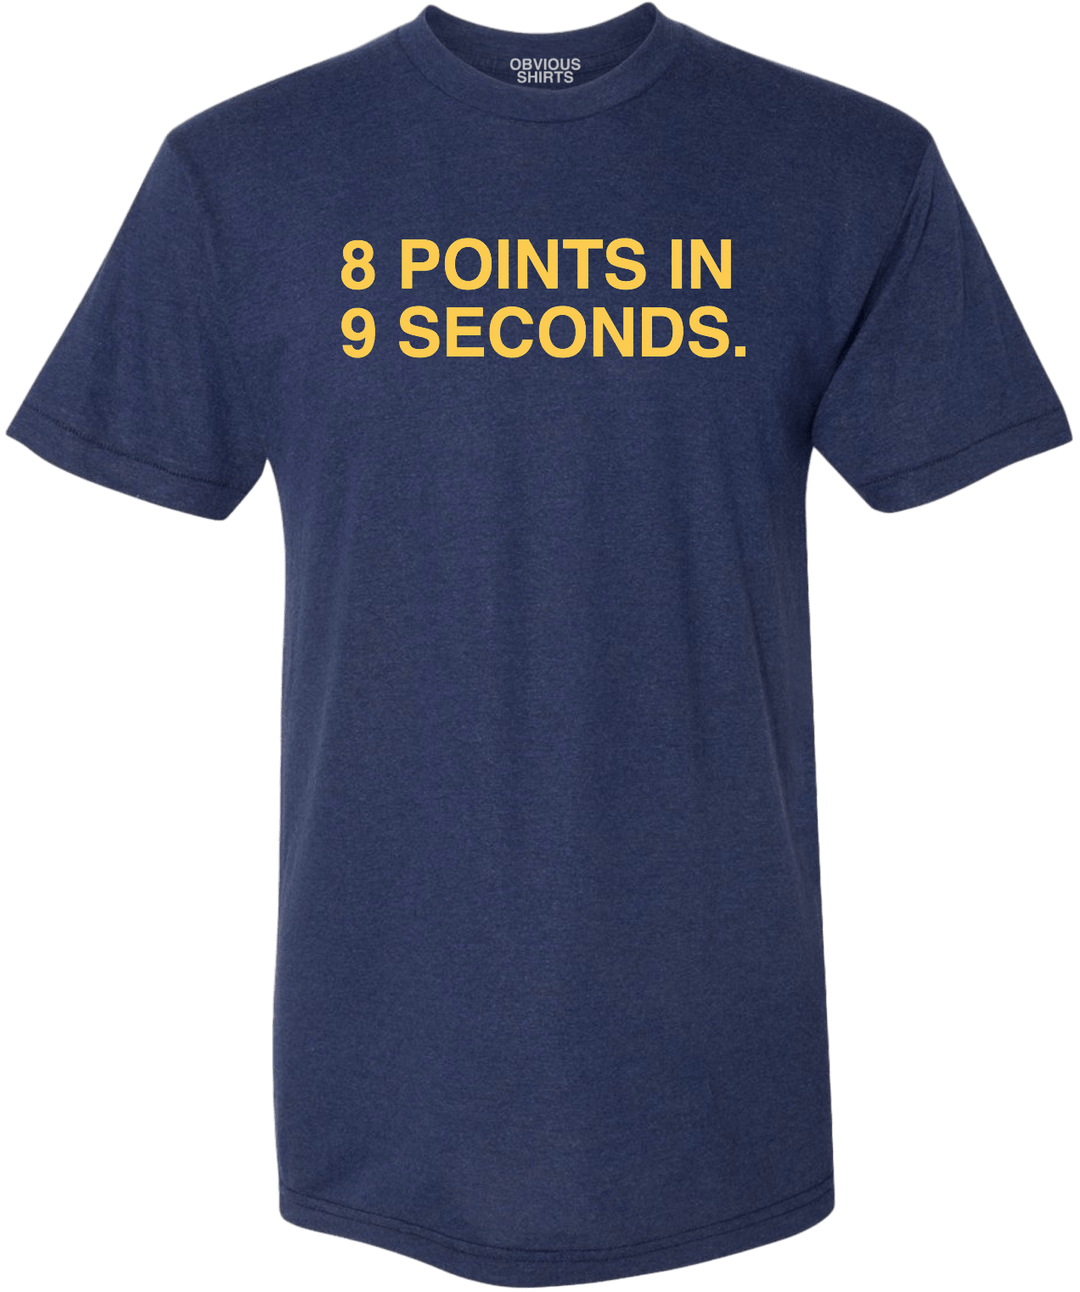 8 POINTS IN 9 SECONDS. - OBVIOUS SHIRTS.